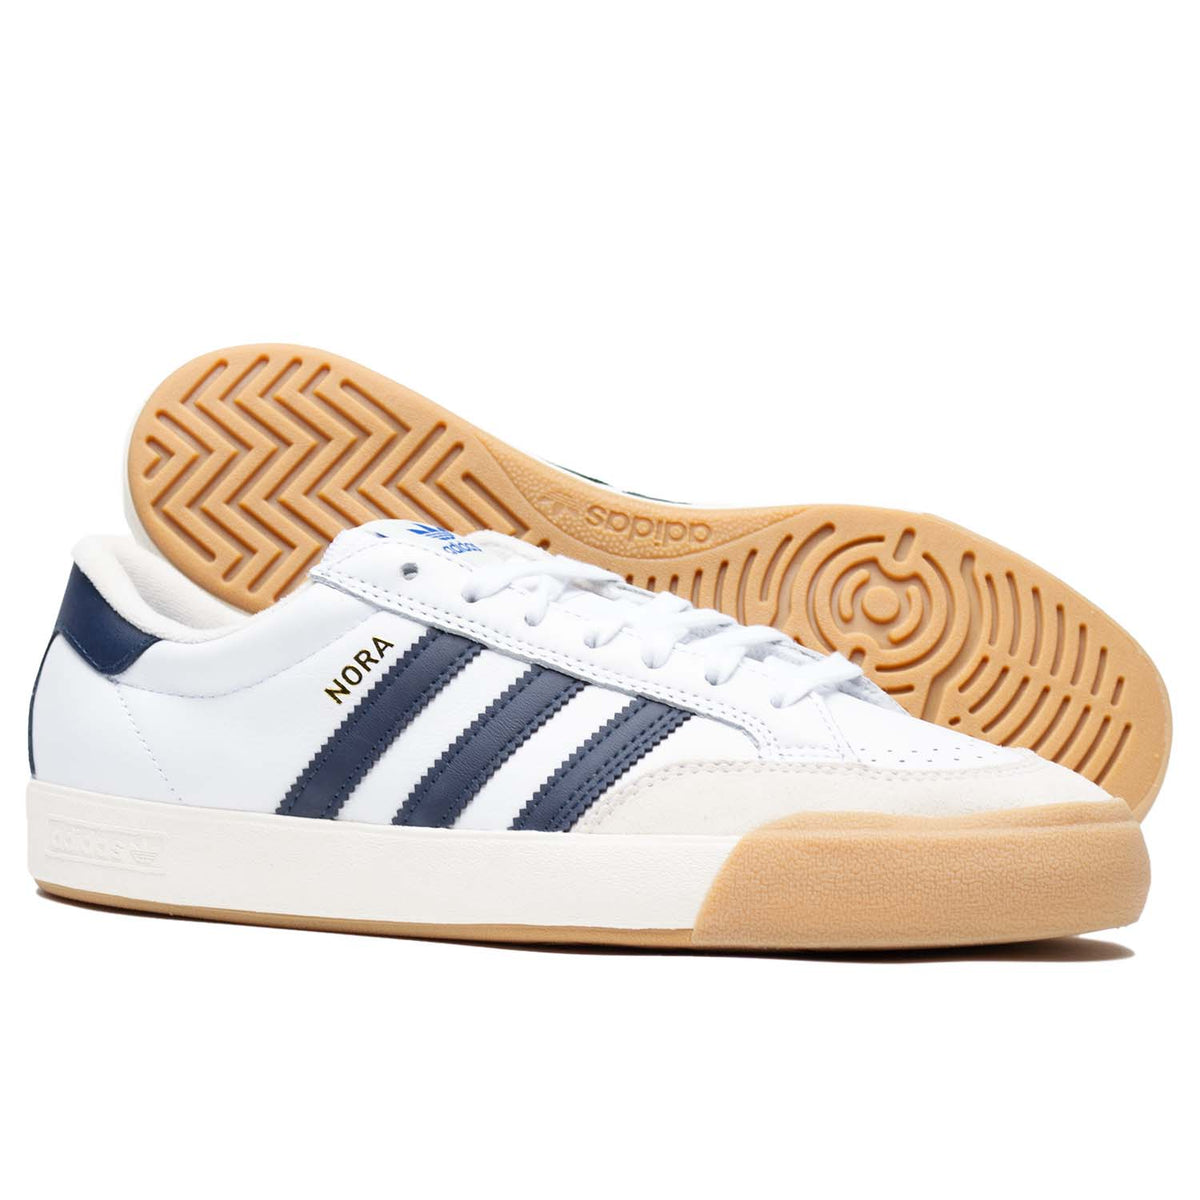 White leather Adias skateboarding shoe with navy leather detailing and cream colored toe cap with white and tan rubber.